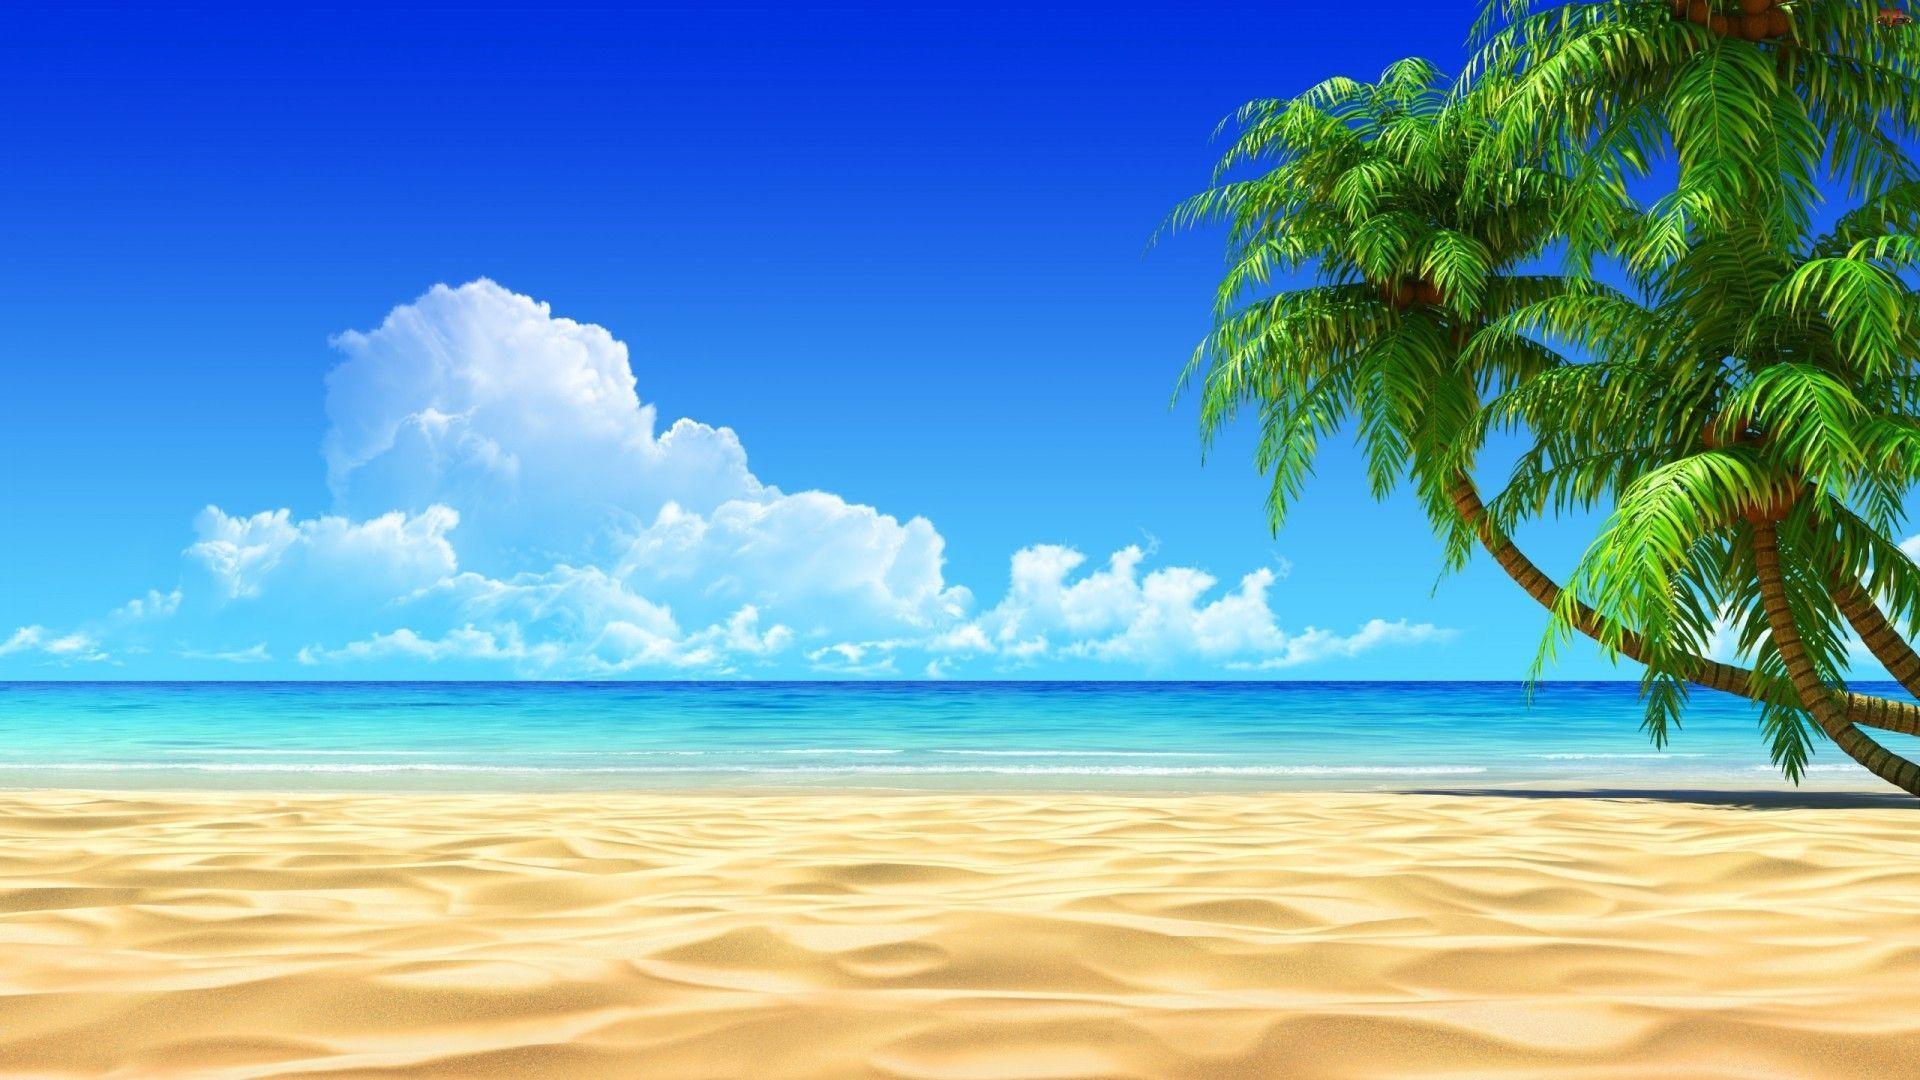 image For > Computer Background Beach